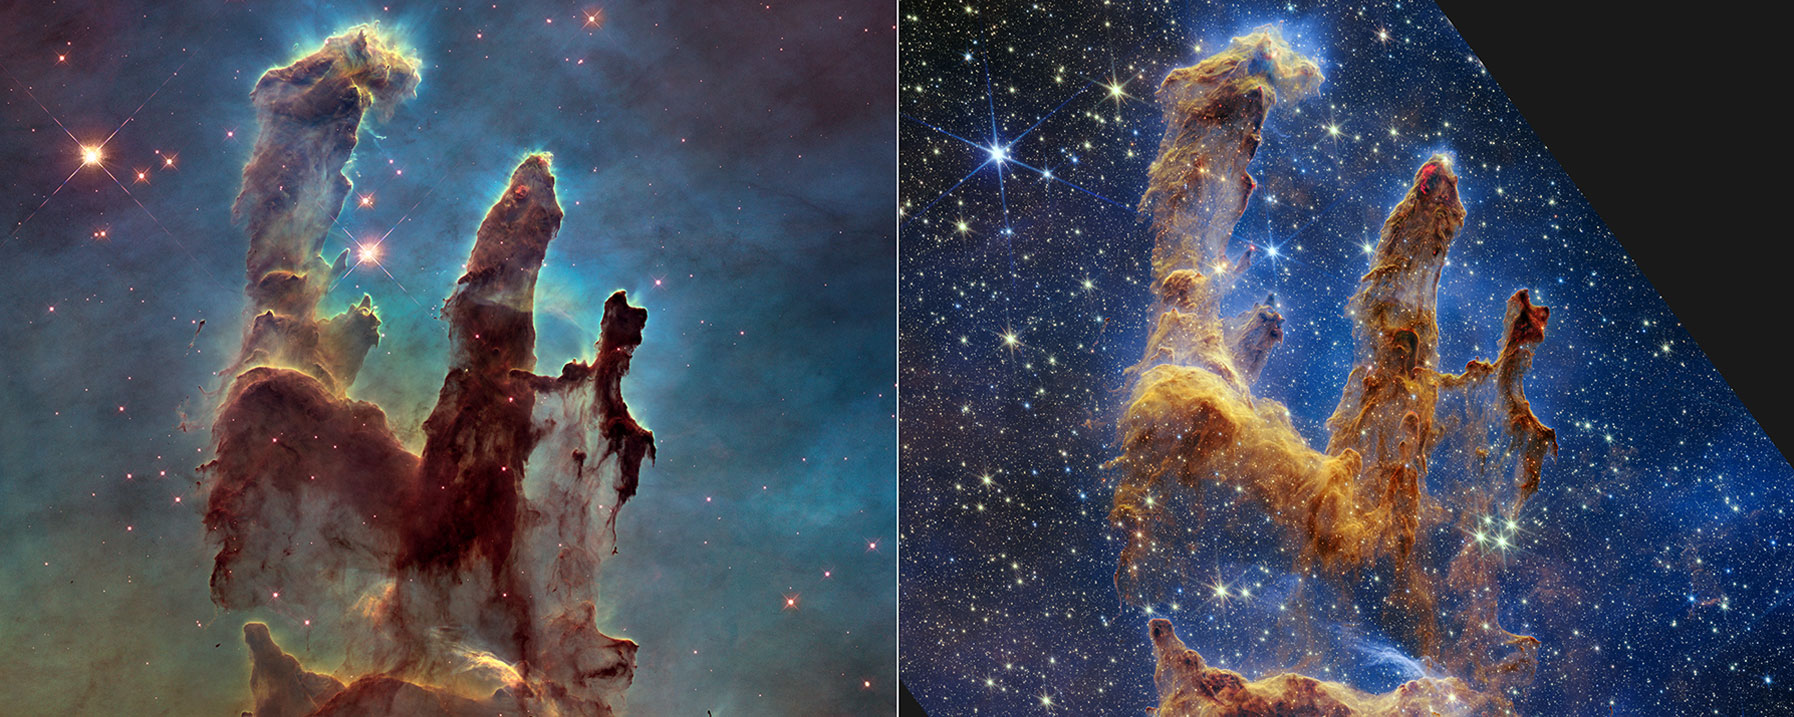 Side by side images of the Pillars of Content as photographed by Hubble and James Webb Telescopes